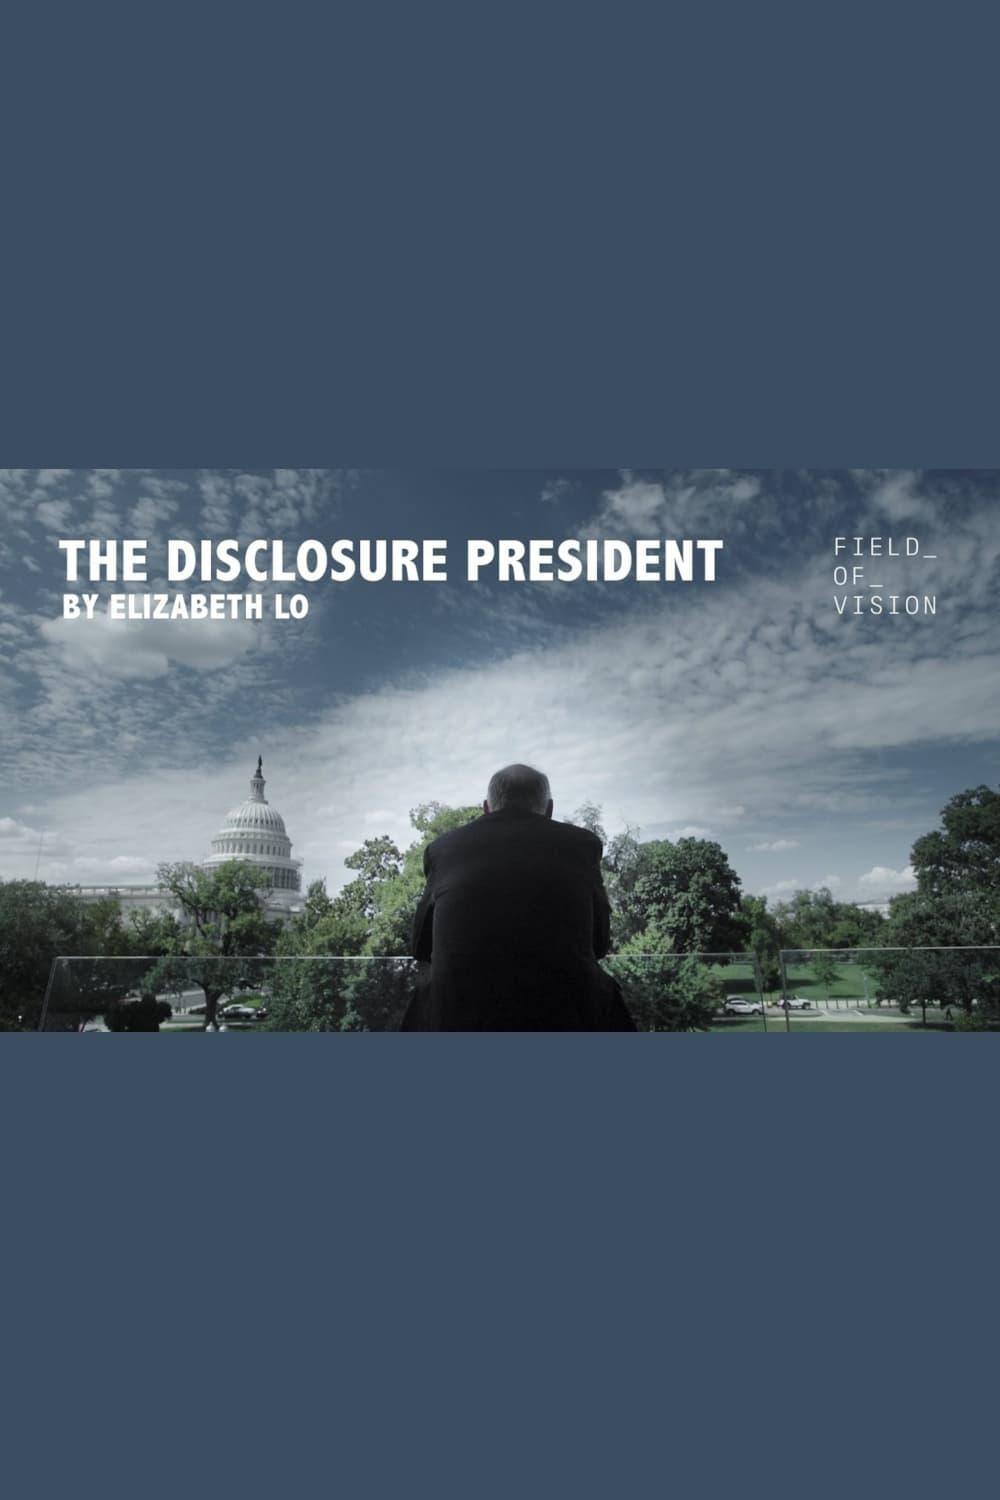 The Disclosure President poster